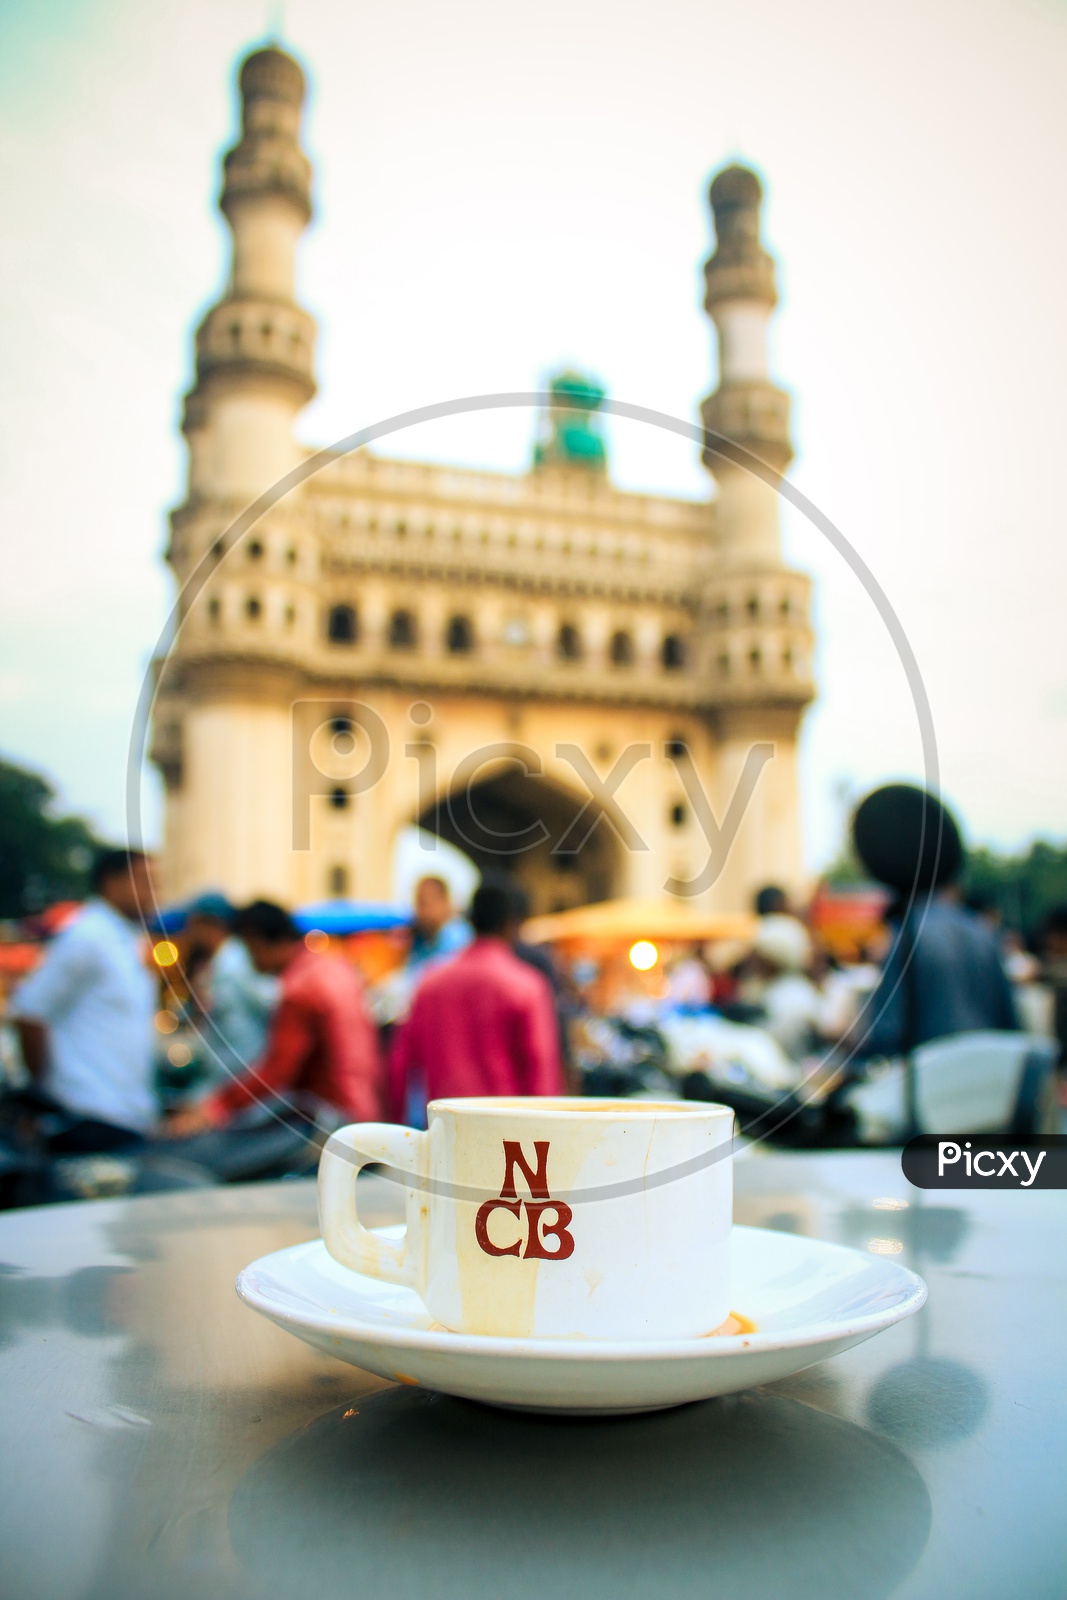 Tea cup and a saucer on the table with Charminar in background